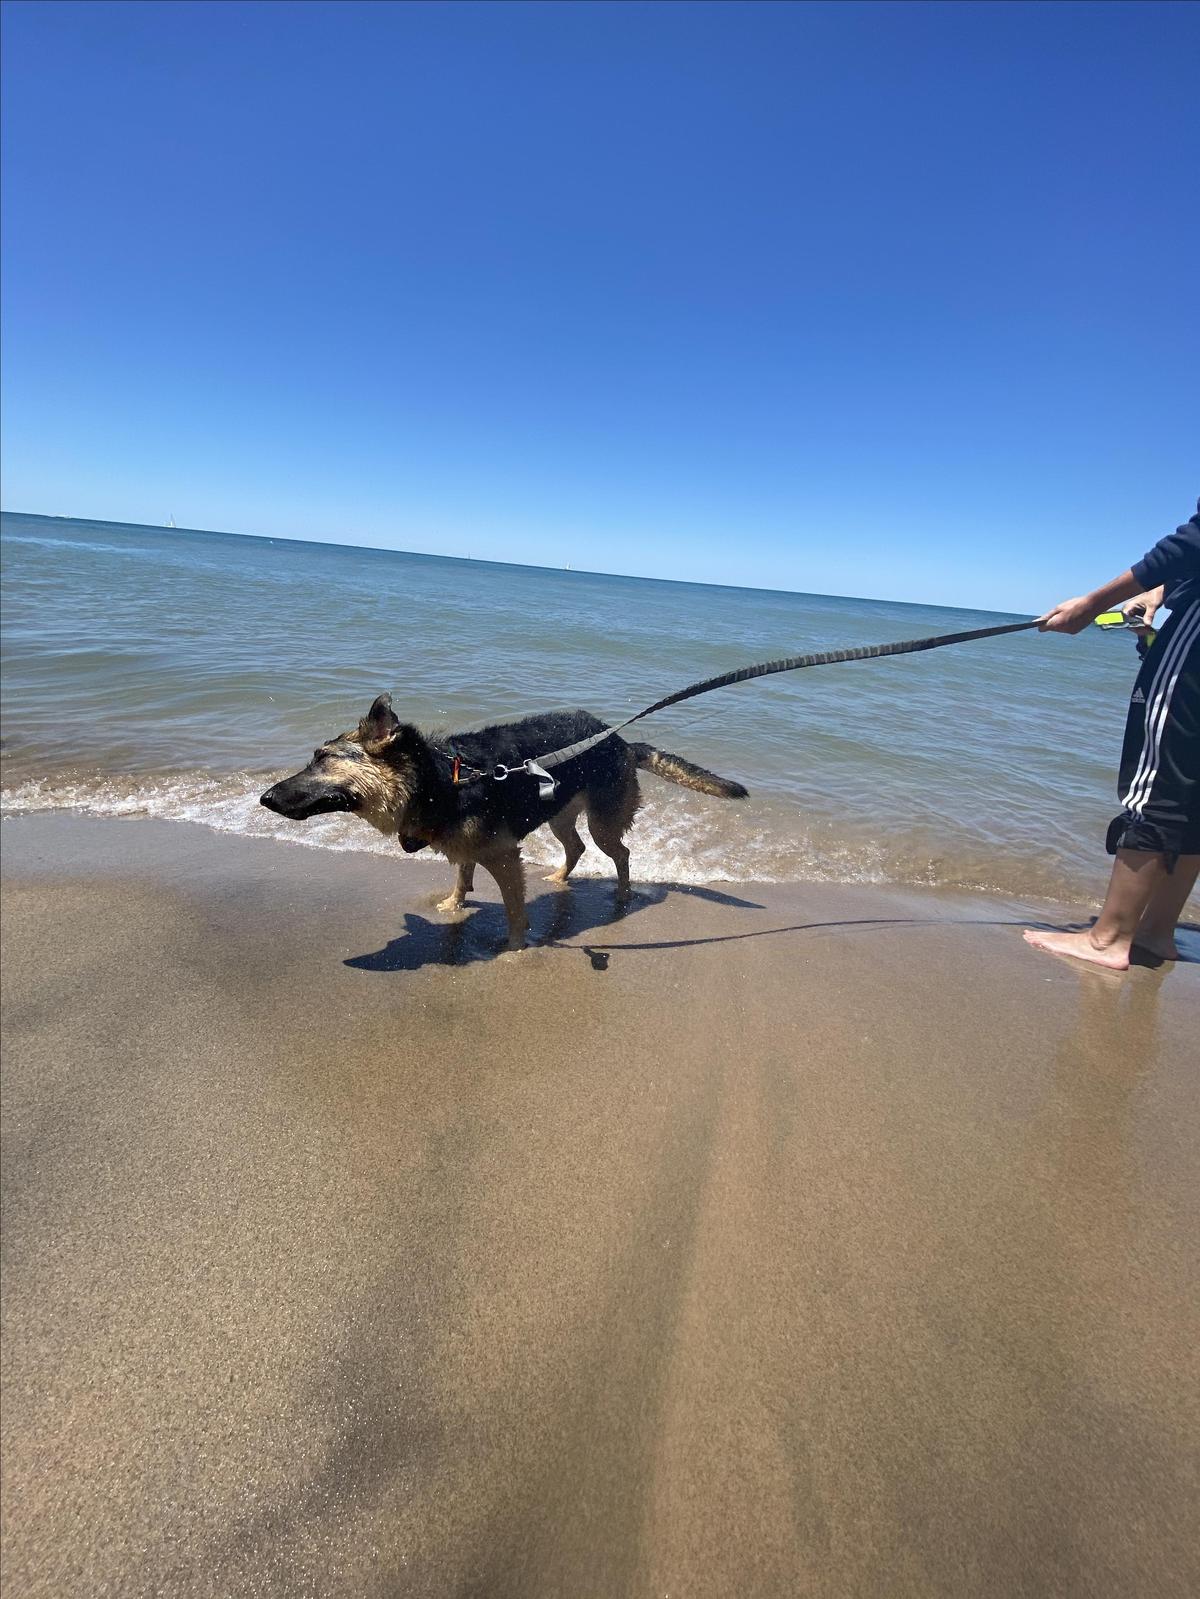 are dogs allowed at saugatuck dunes state park